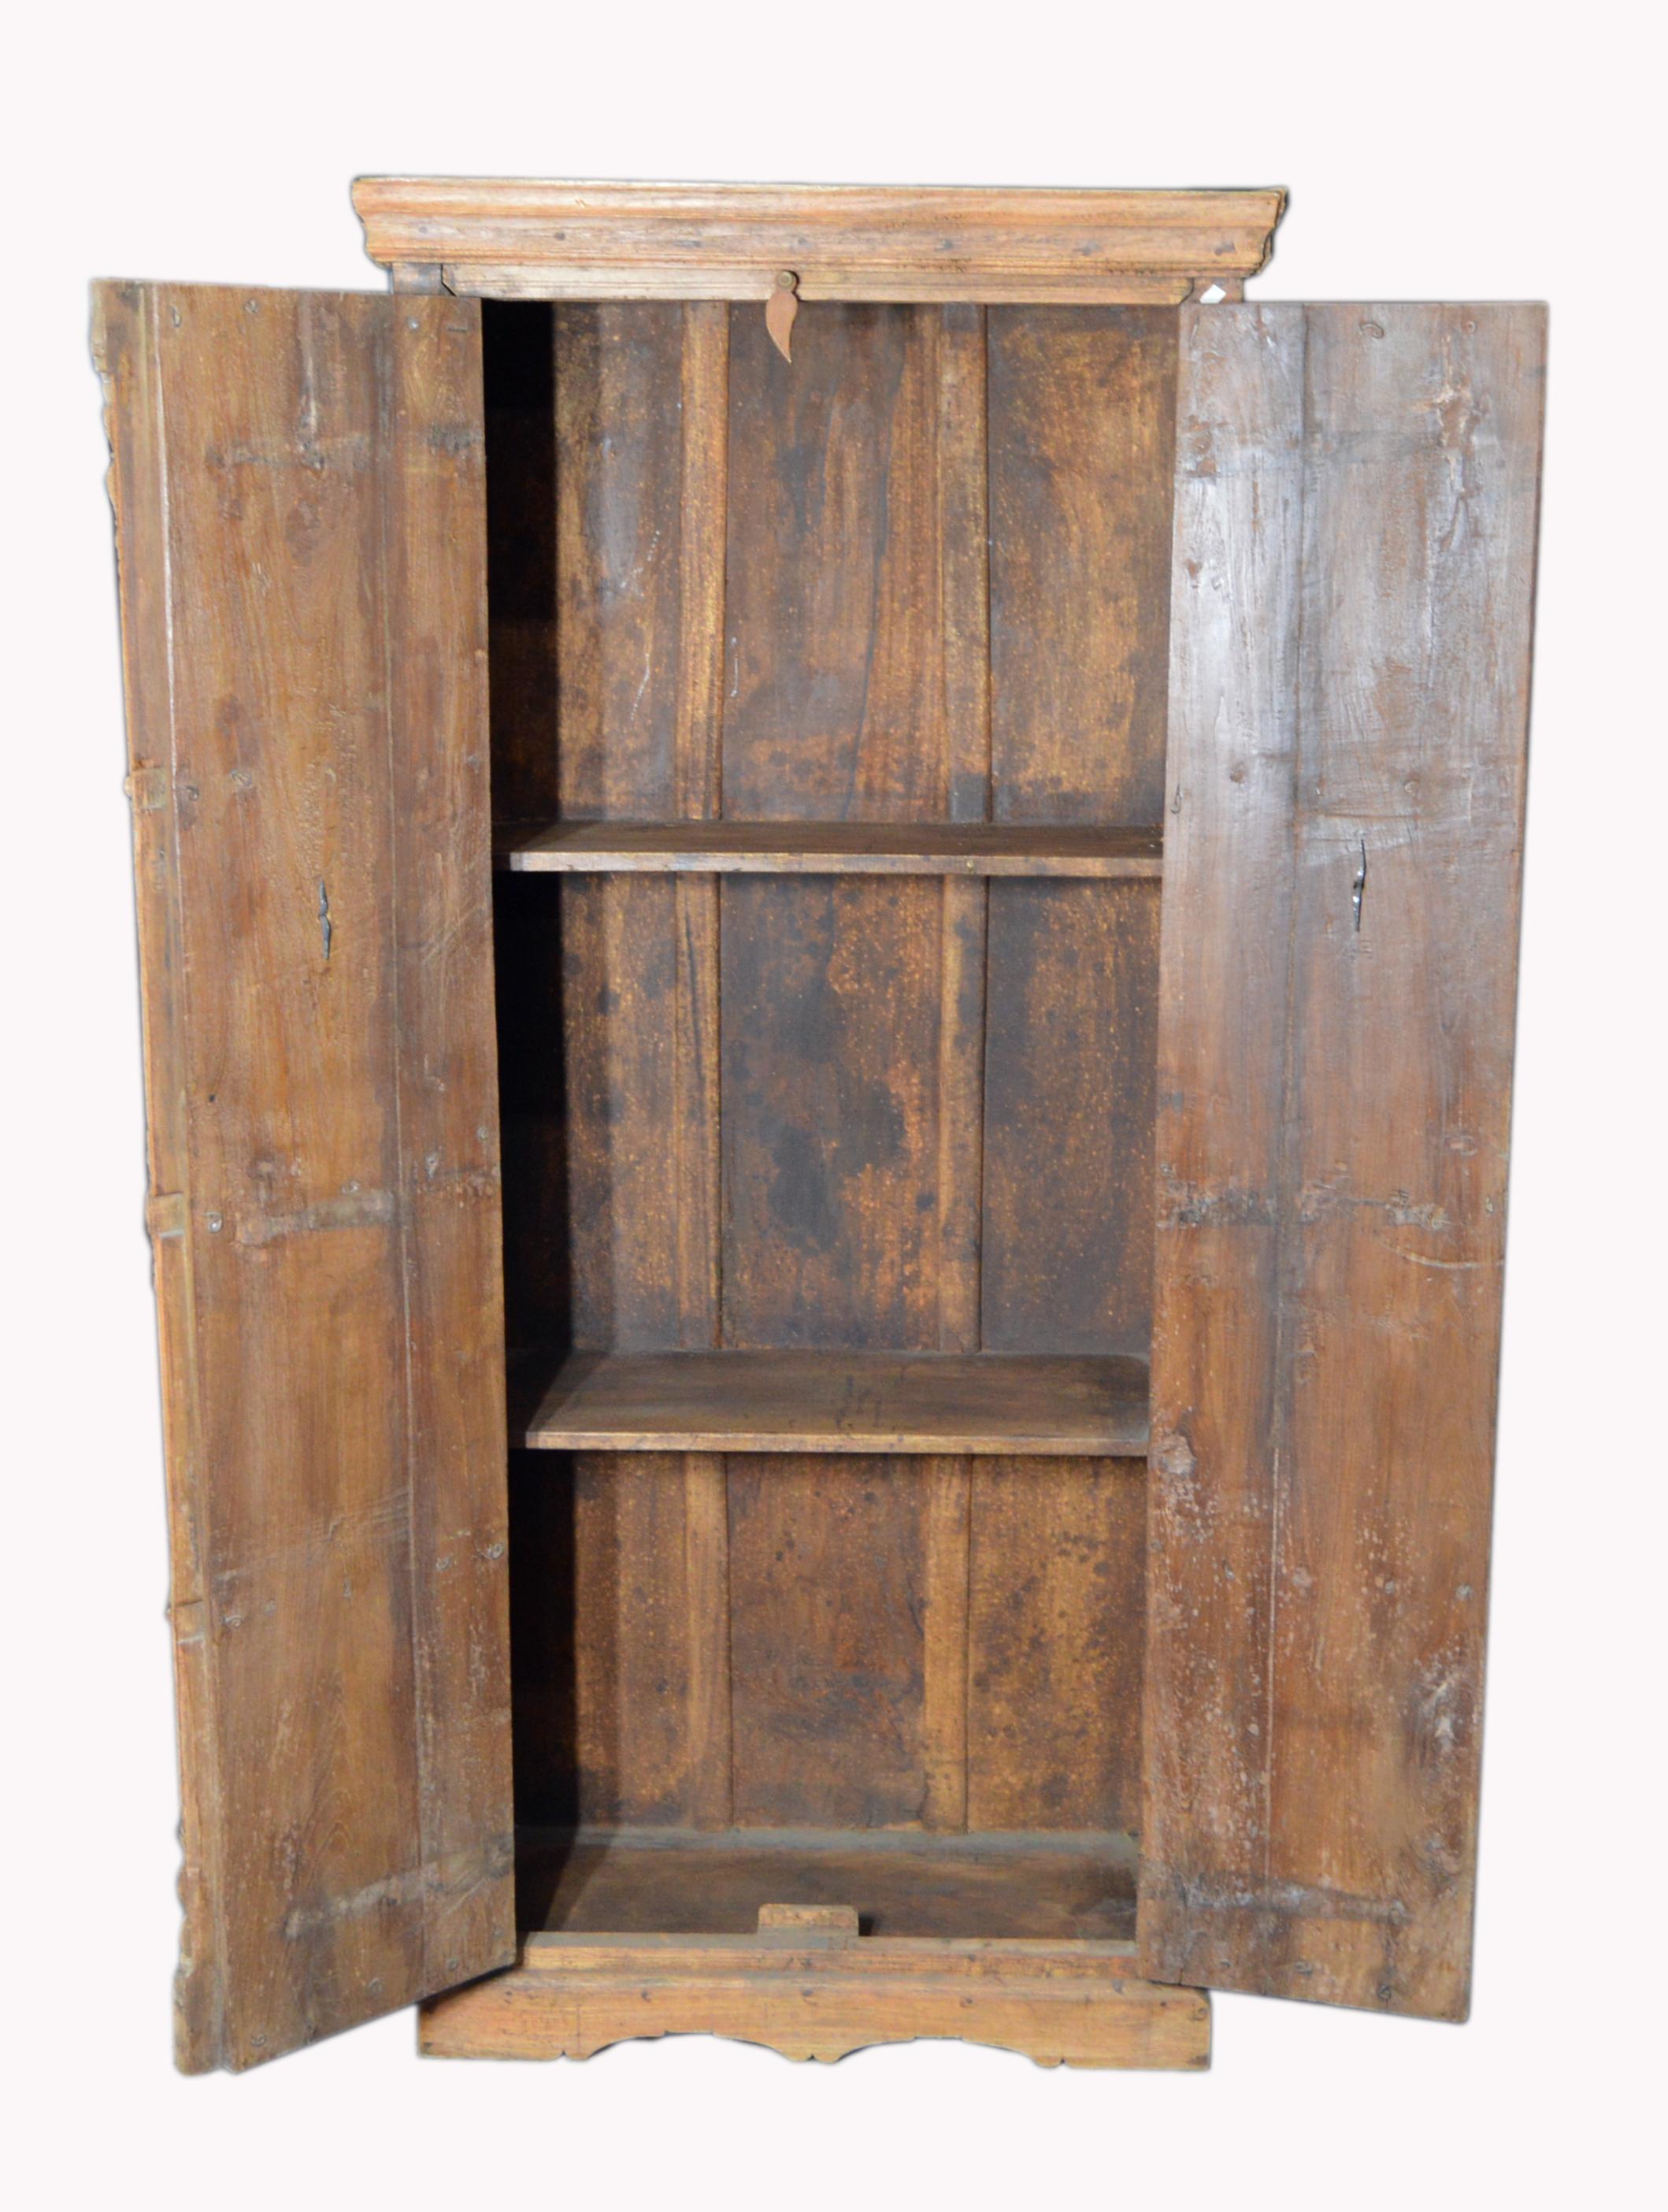 20th Century Indian Vintage Wooden Armoire with Metal Braces and Hand-Carved Decor